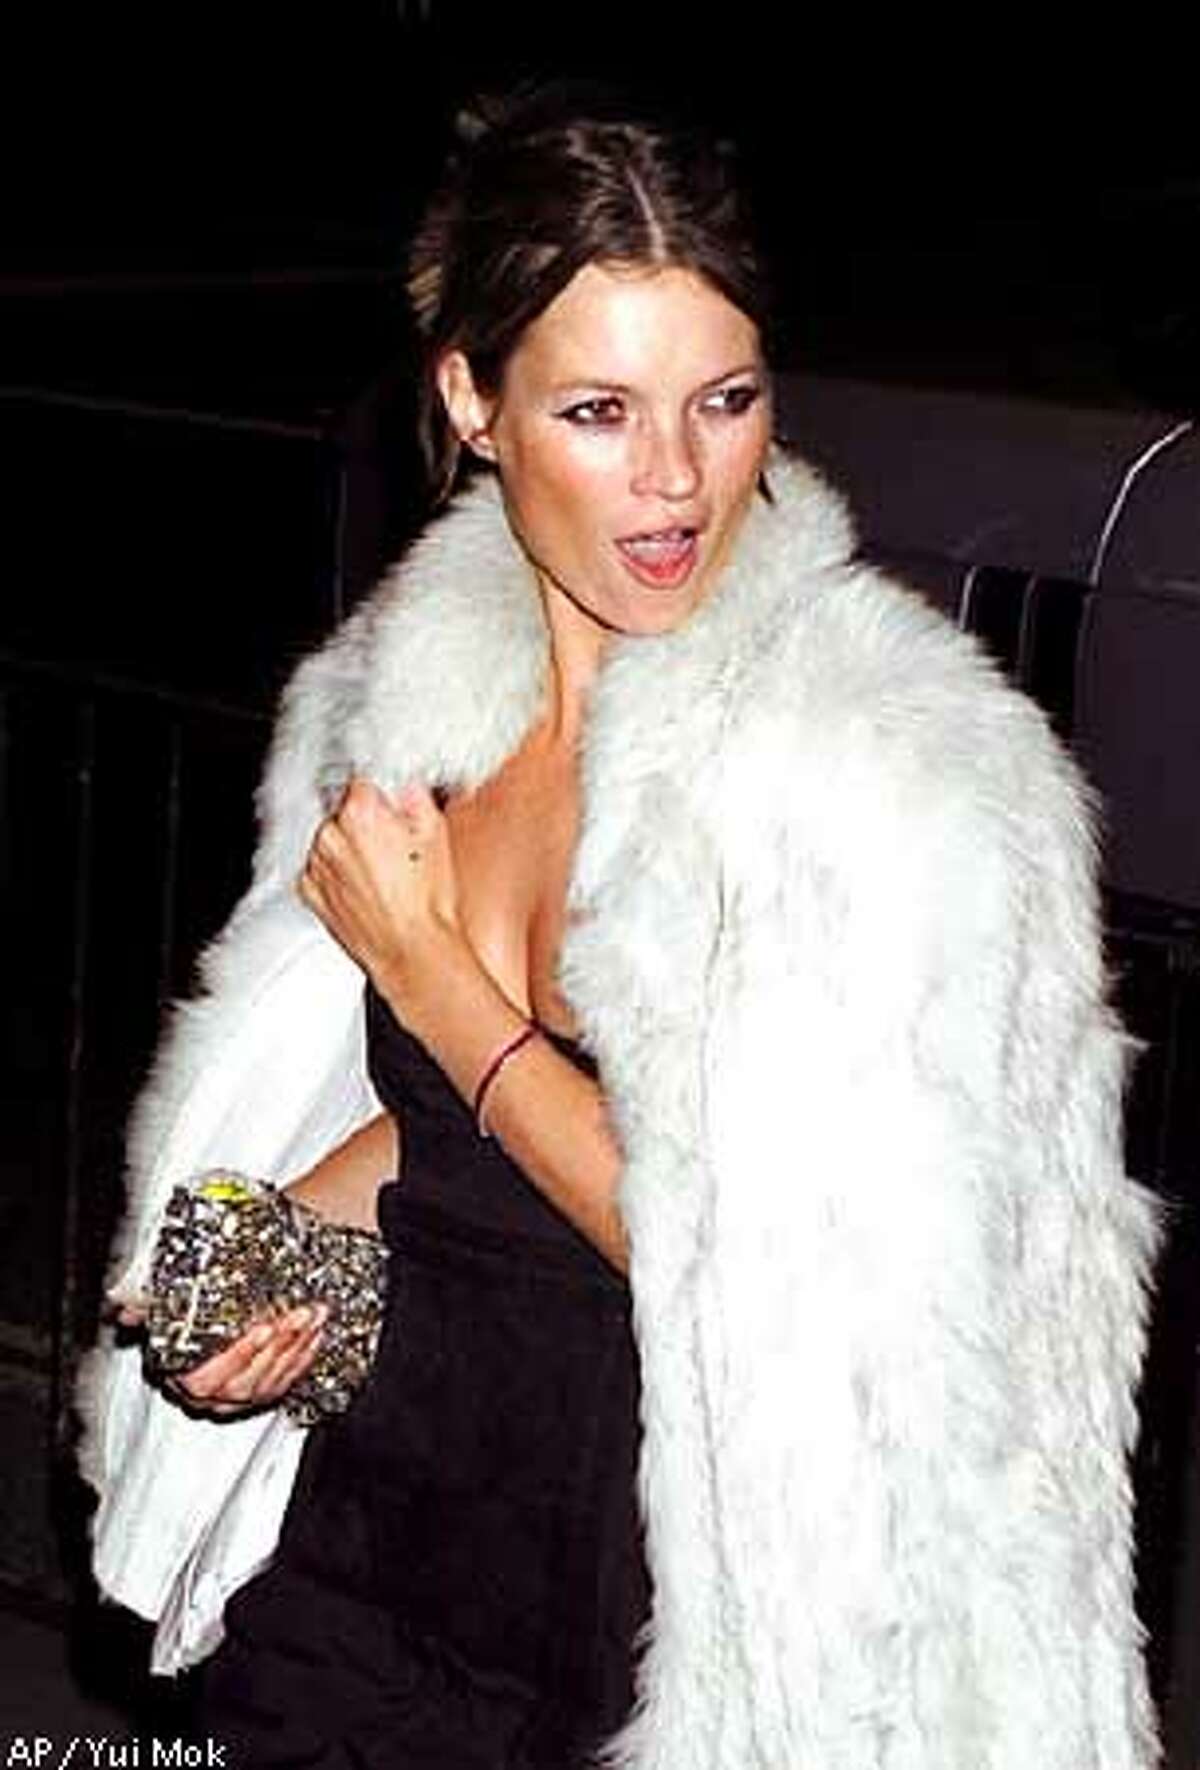 Model Kate Moss arrives at the National Portrait Gallery in London Tuesday, Jan. 29, 2002 for a private party to celebrate the launch of an exhibition of celebrity portraiture by fashion photographer Mario Testino. (AP Photo/PA, Yui Mok)